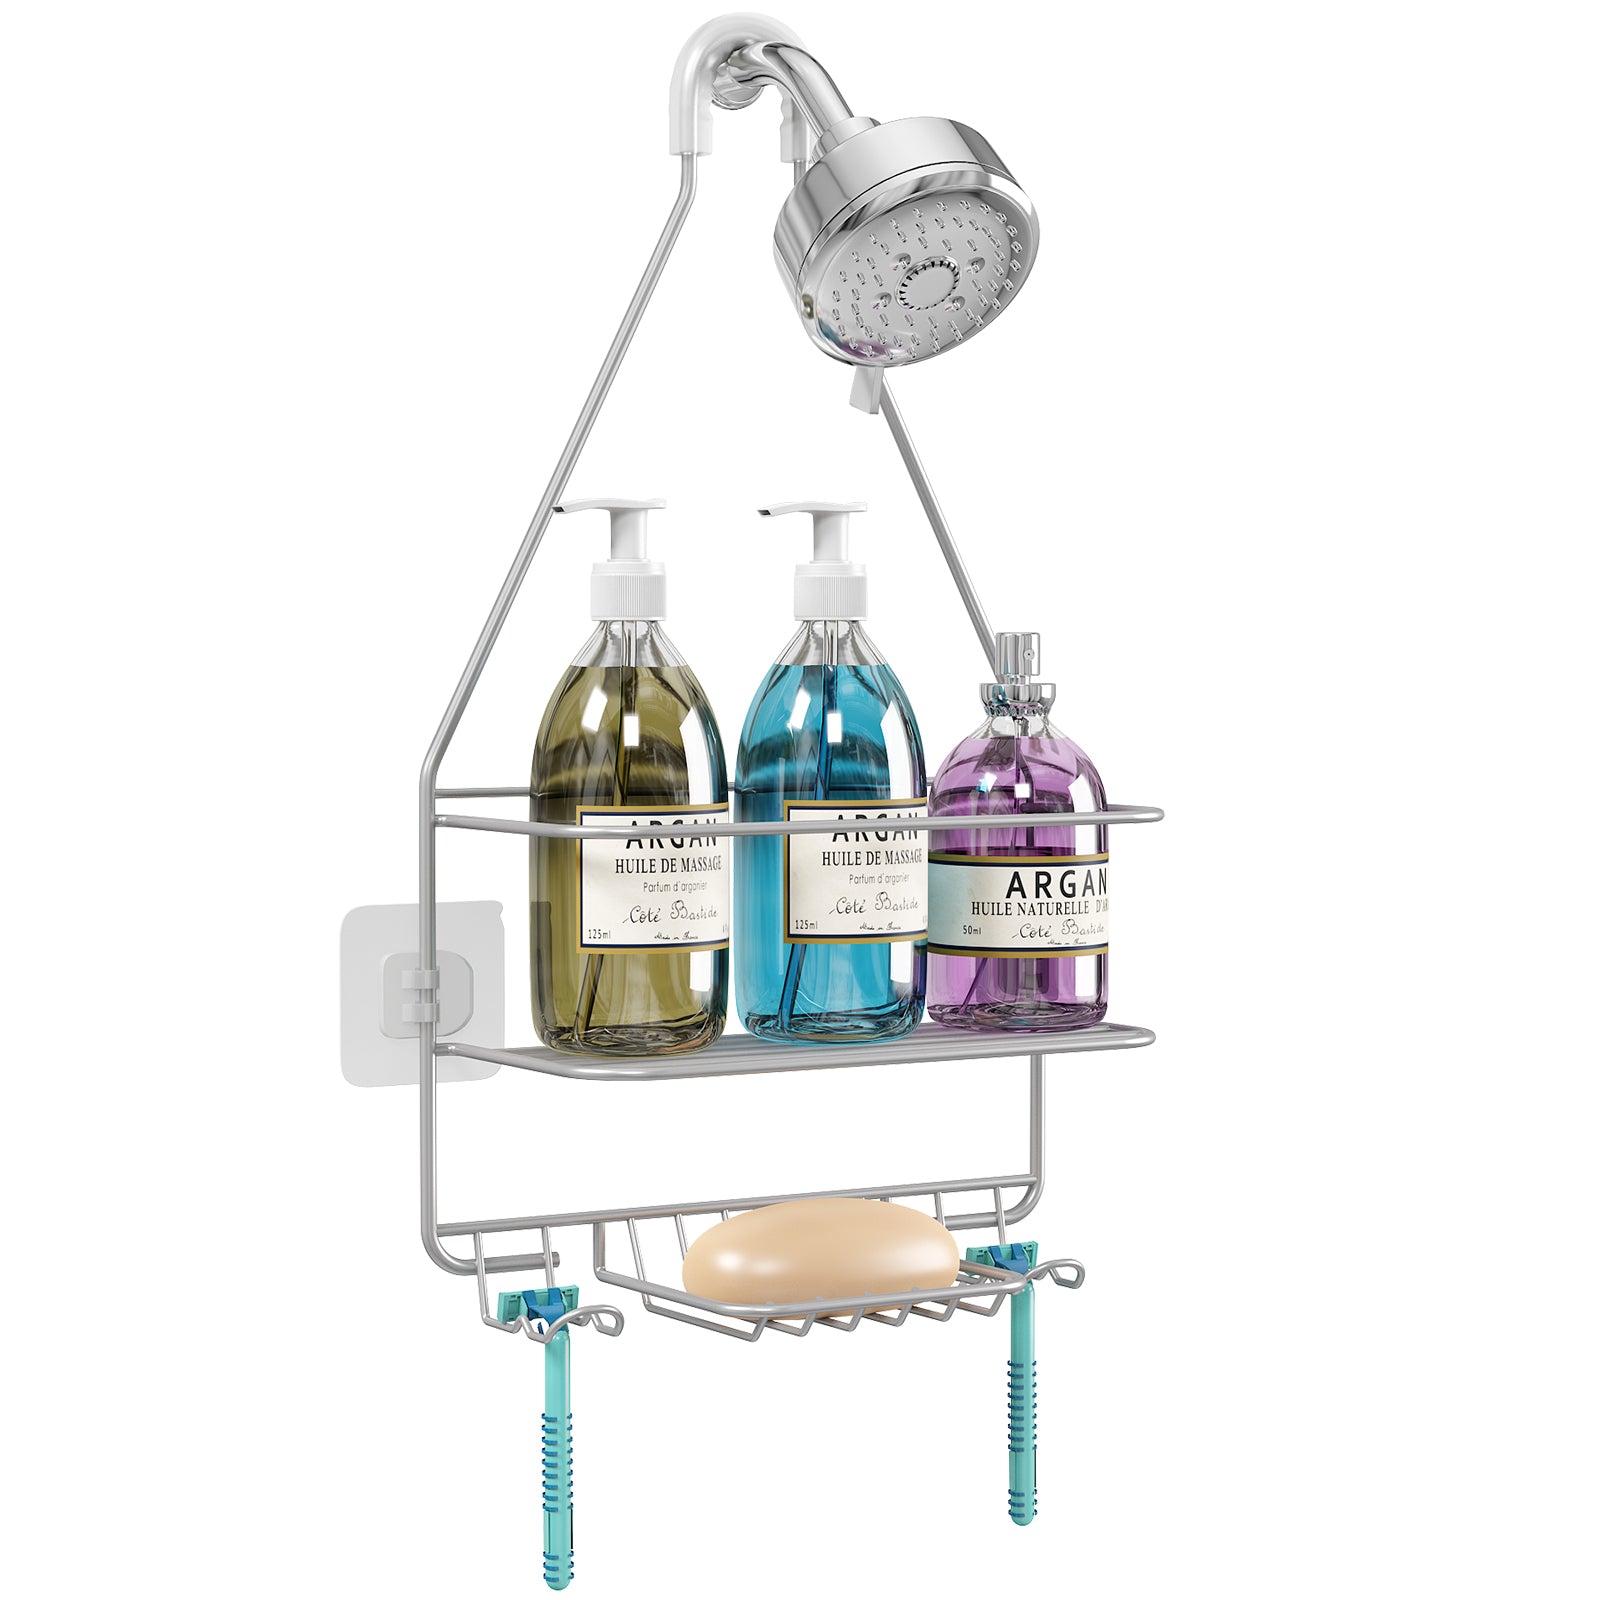  HAMITOR Adjustable Large Shower Organizer with Soap